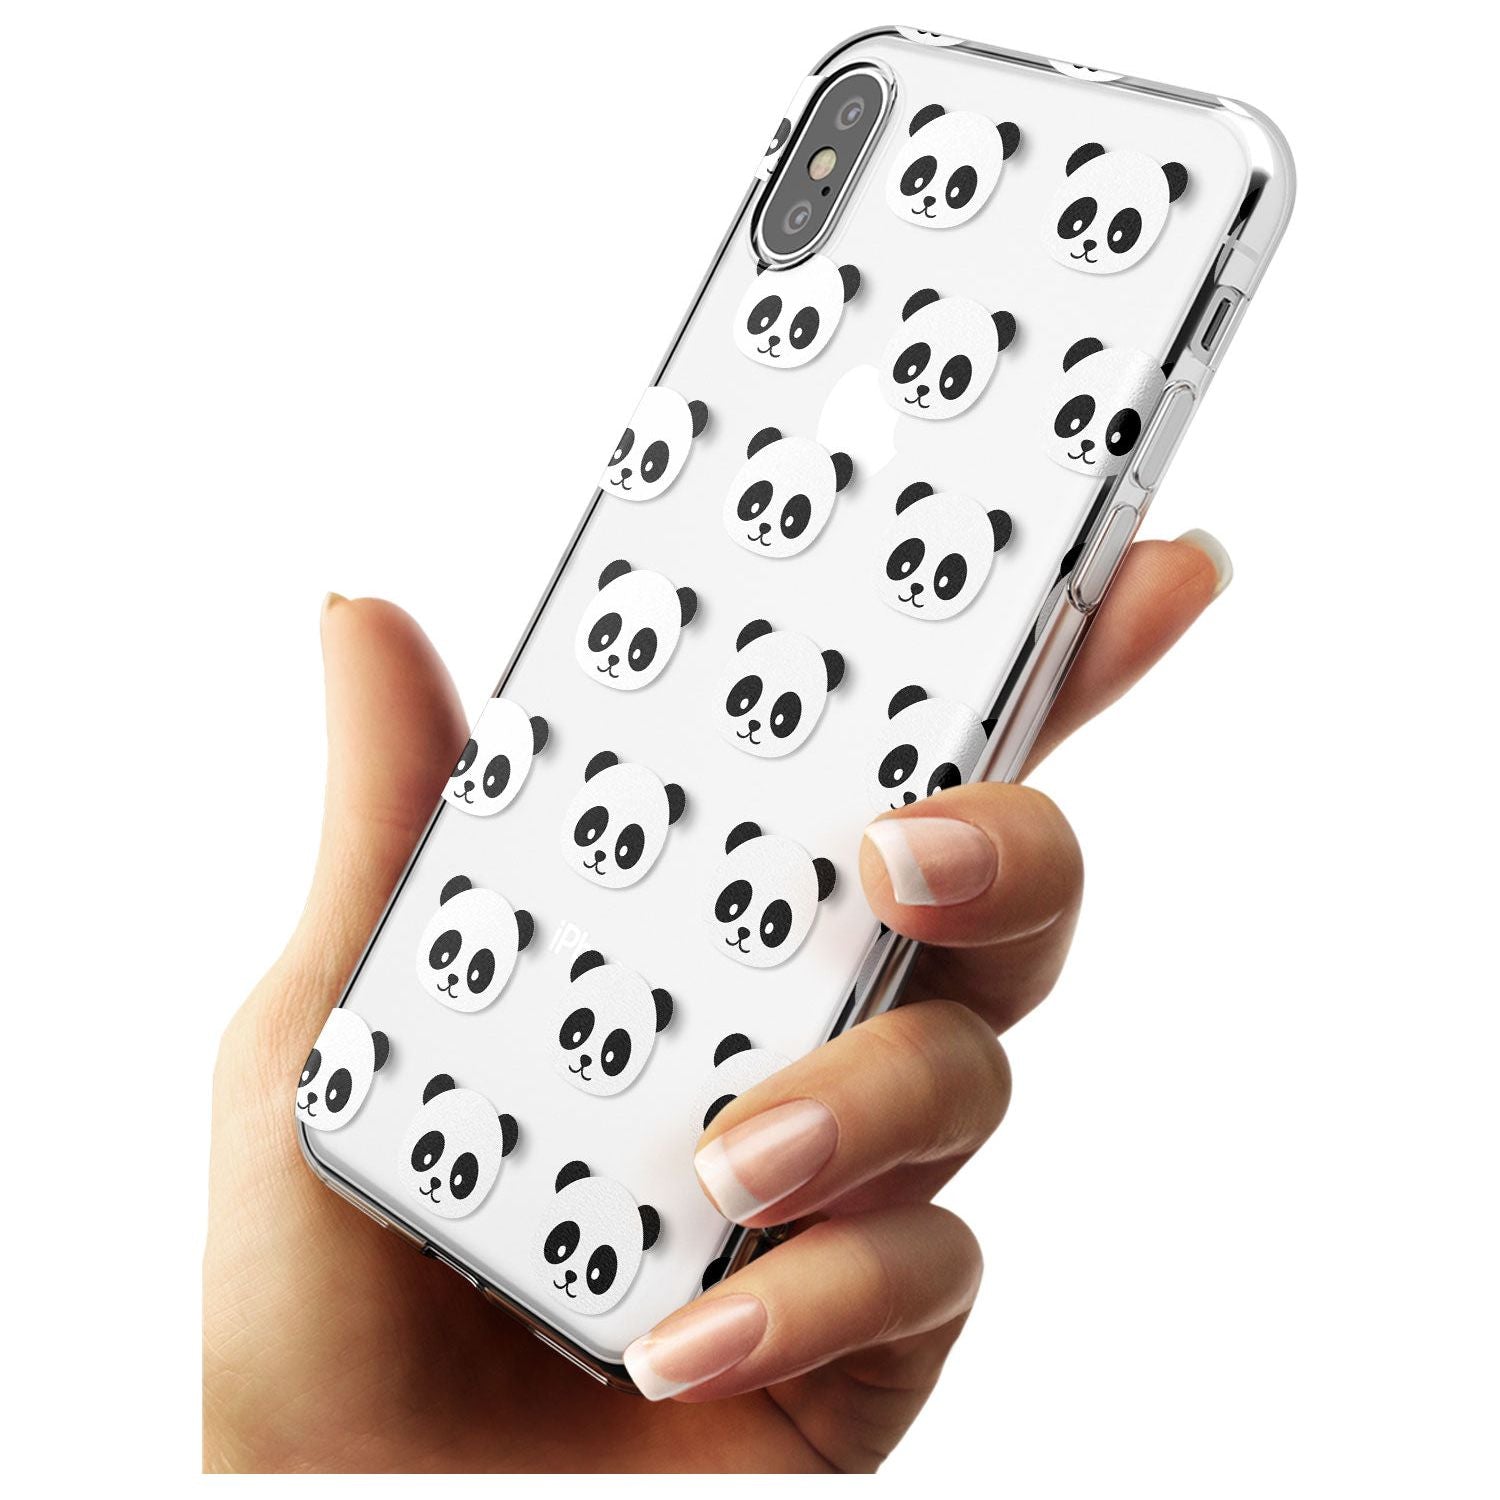 Panda Face Pattern Black Impact Phone Case for iPhone X XS Max XR